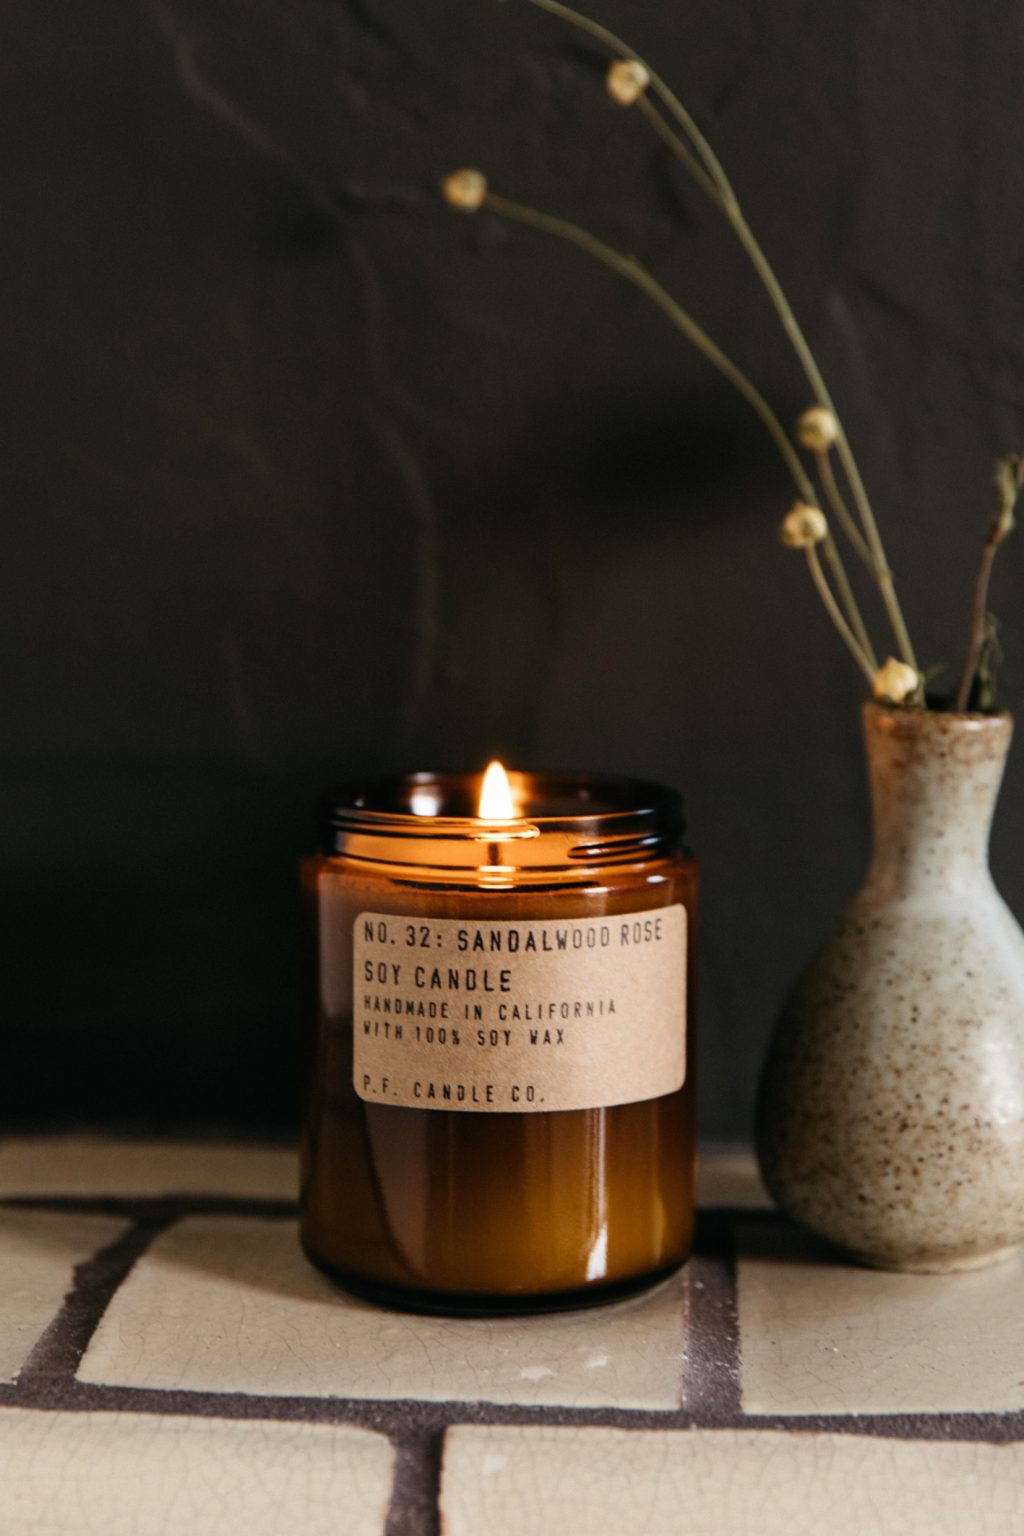 P.F. Candle Co – Scented Candle – Sandalwood Rose - meshit